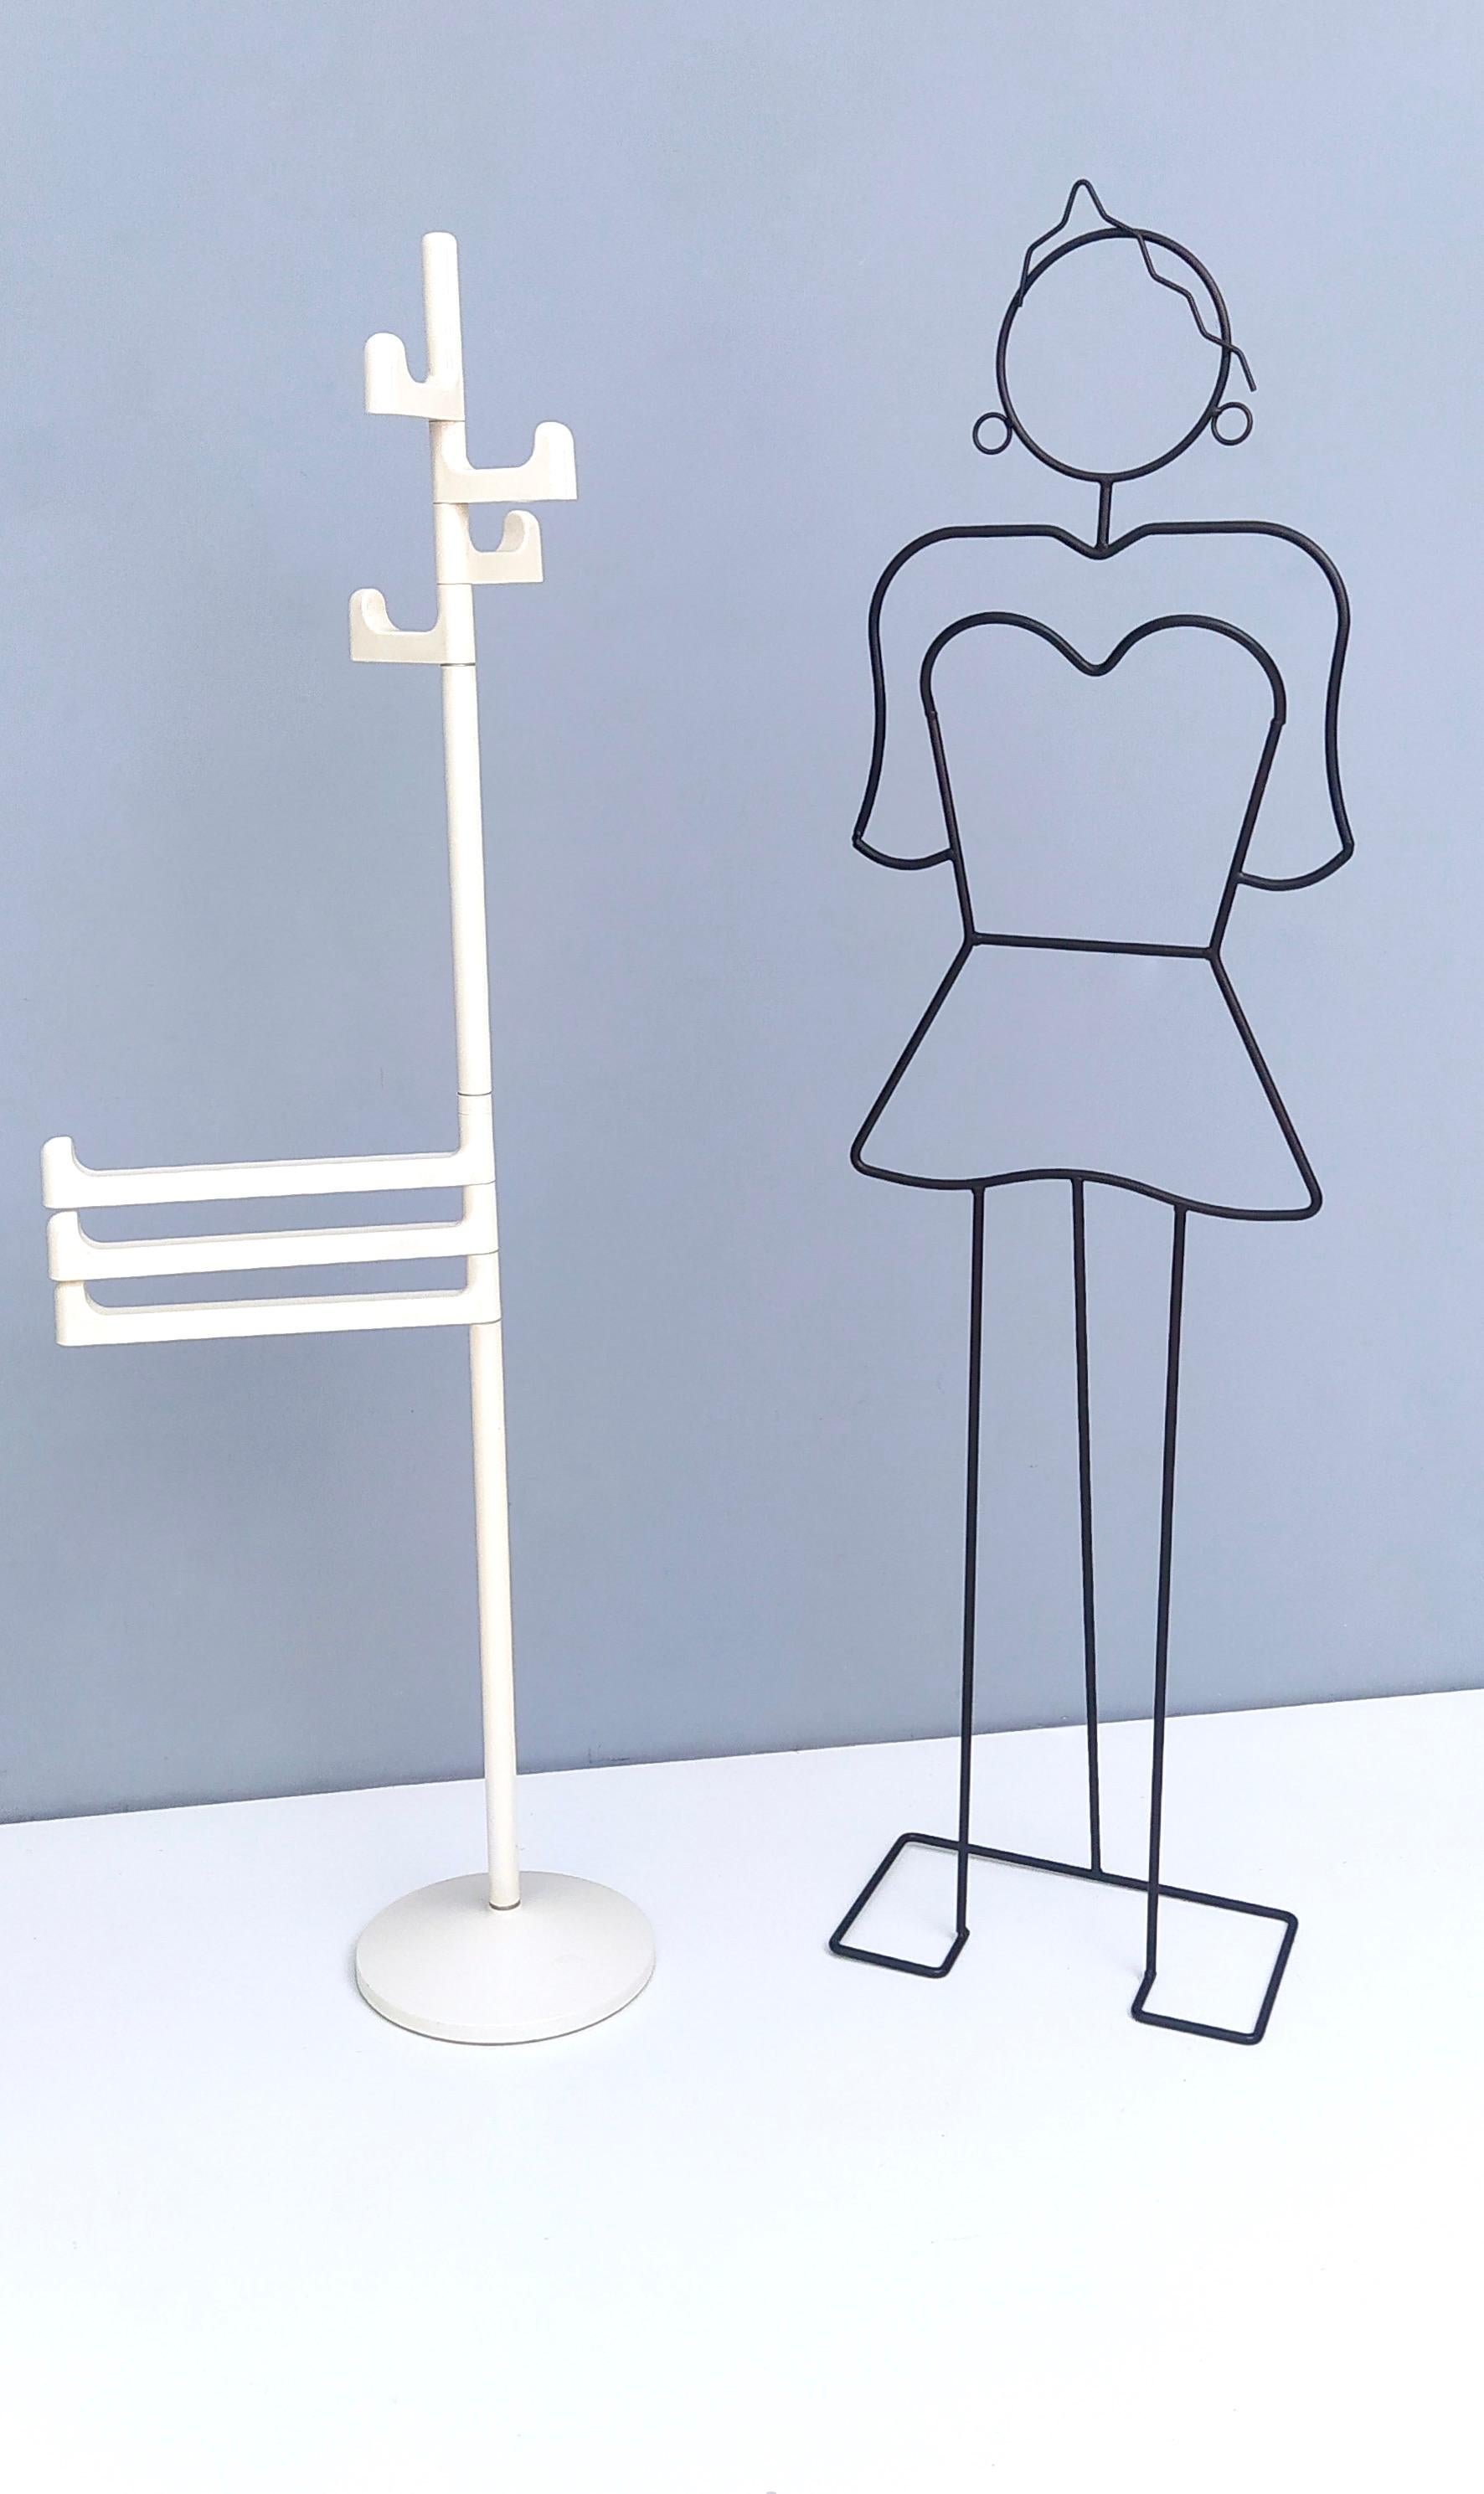 Italy, 1970s. 
This is a modern Italian towel rack or coat rack in white plastic designed by Makio Hasuike for Gedy. It features seven arms.
It was designed in the 1970s by famed Japanese designer, Makio Hasuike, for the Italian bathroom products